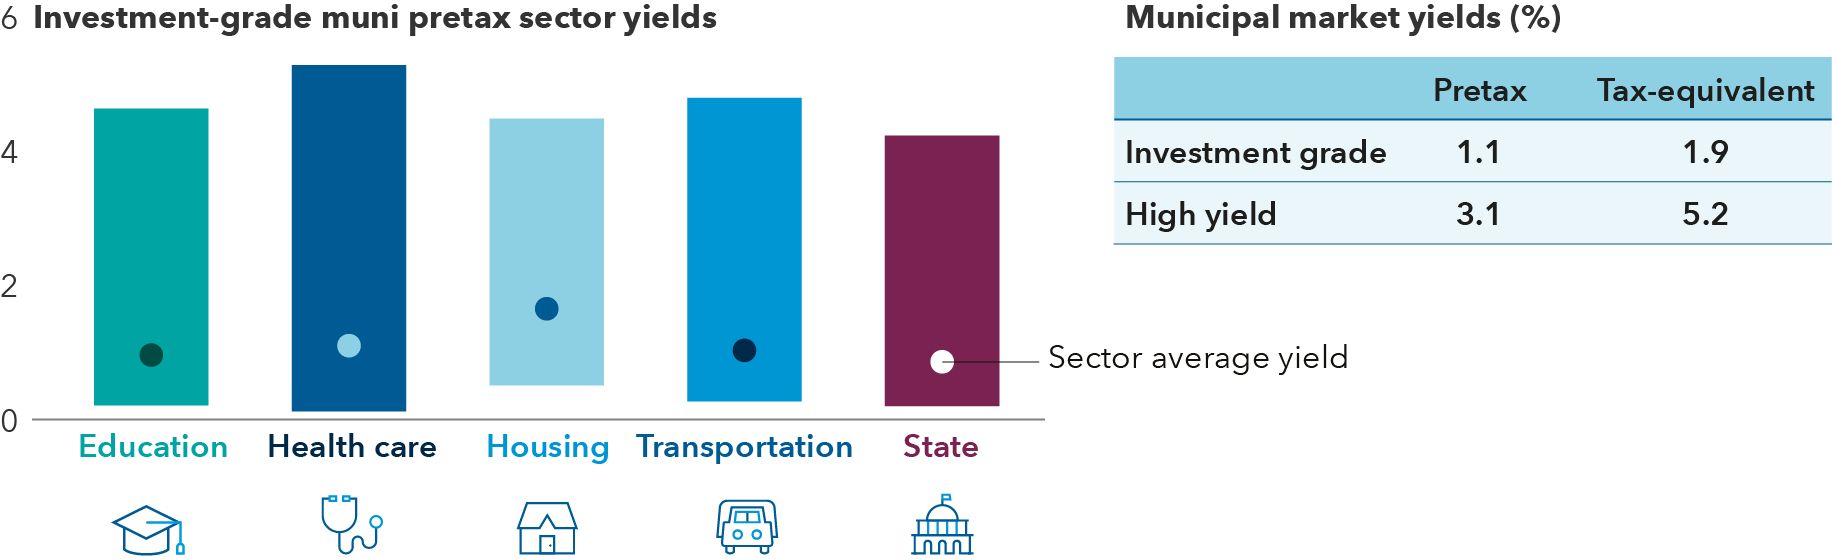 The graphic contains two charts. The first displays investment-grade muni pretax sector yields across education, health care, housing, transportation, and state sectors. Average yields range from 1% to 2% across sectors. The second chart displays municipal market yields on a pretax and tax-equivalent basis for investment grade and high-yield bonds. Investment grade bonds yield 1.1% on a pretax basis and 1.9% on a tax-equivalent basis. High-yield bonds yield 3.1% on a pretax basis and 5.2% on a tax-equivalent basis. 